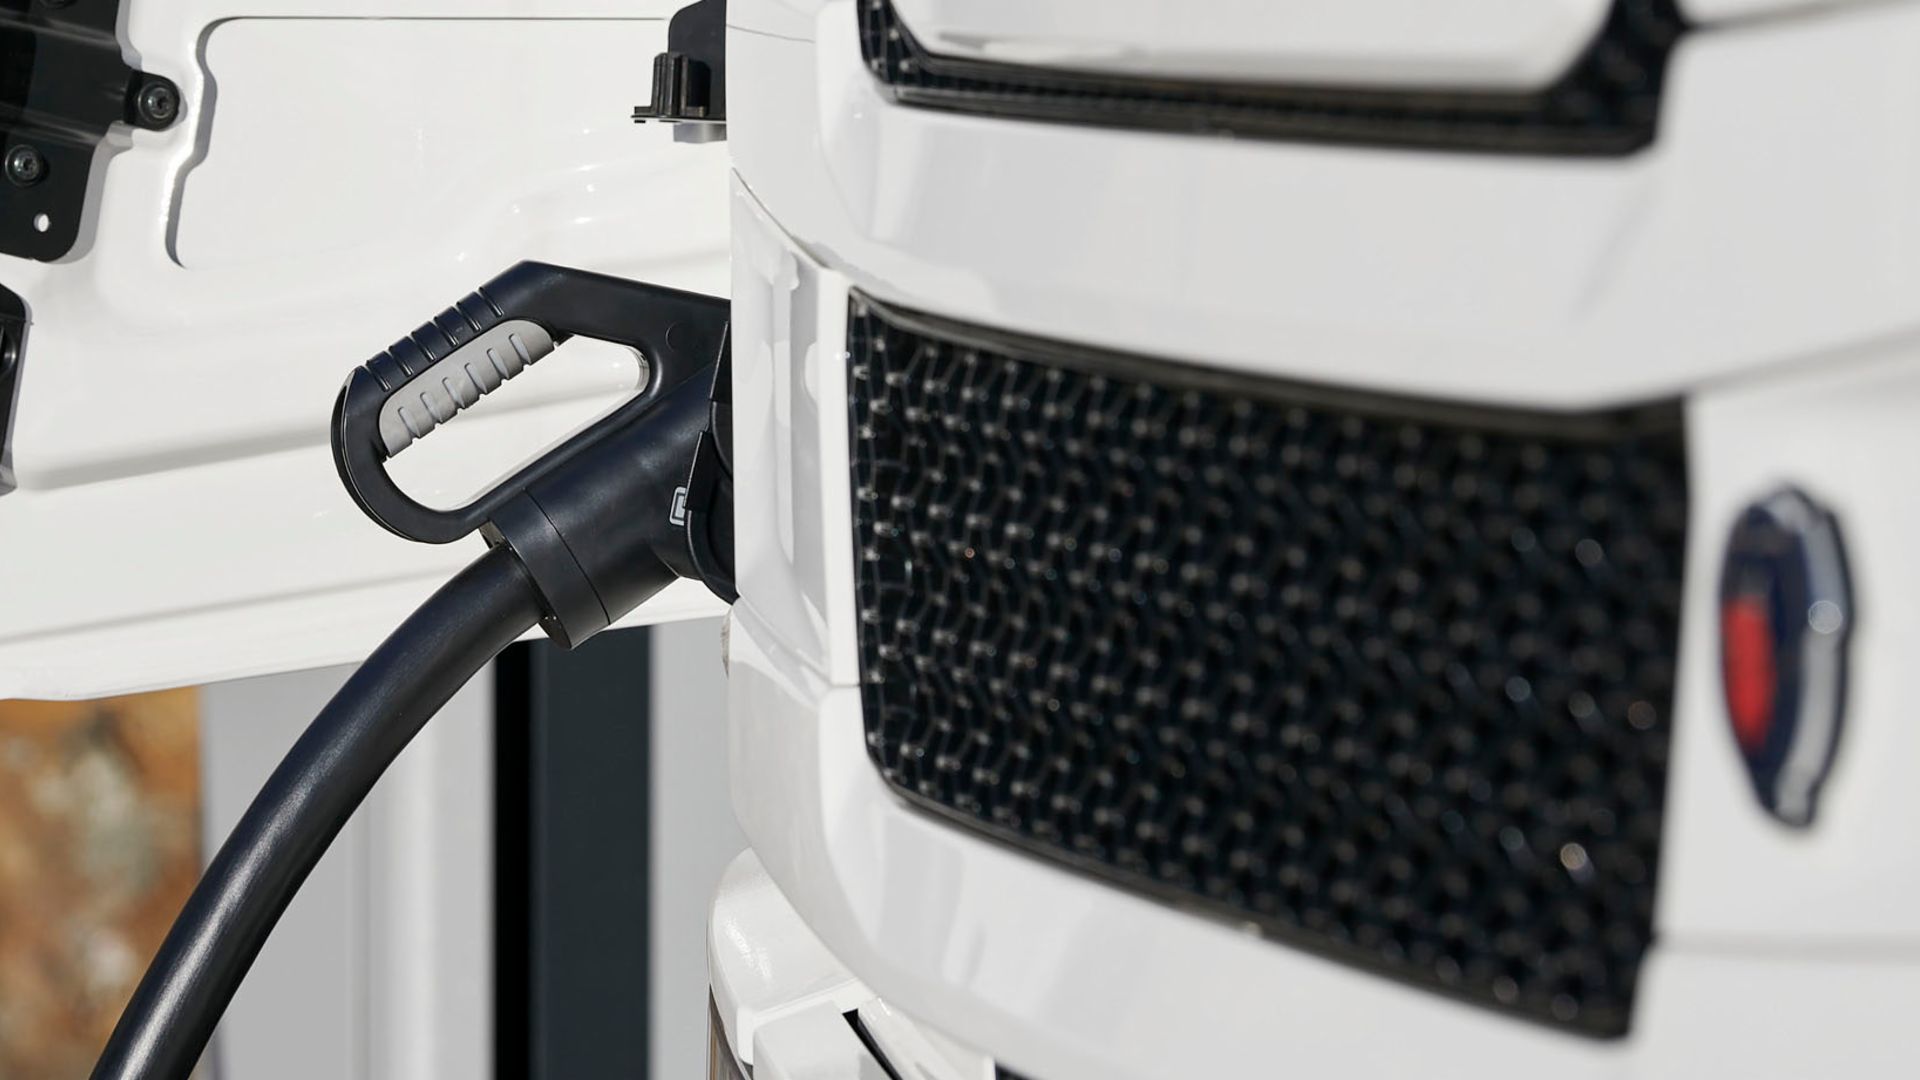 Scania is to offer seamless access to a Europe-based charging network suitable for mixed fleets of trucks and buses, to help simplify the transition to electrification and fulfil customers’ need for more charging solutions.